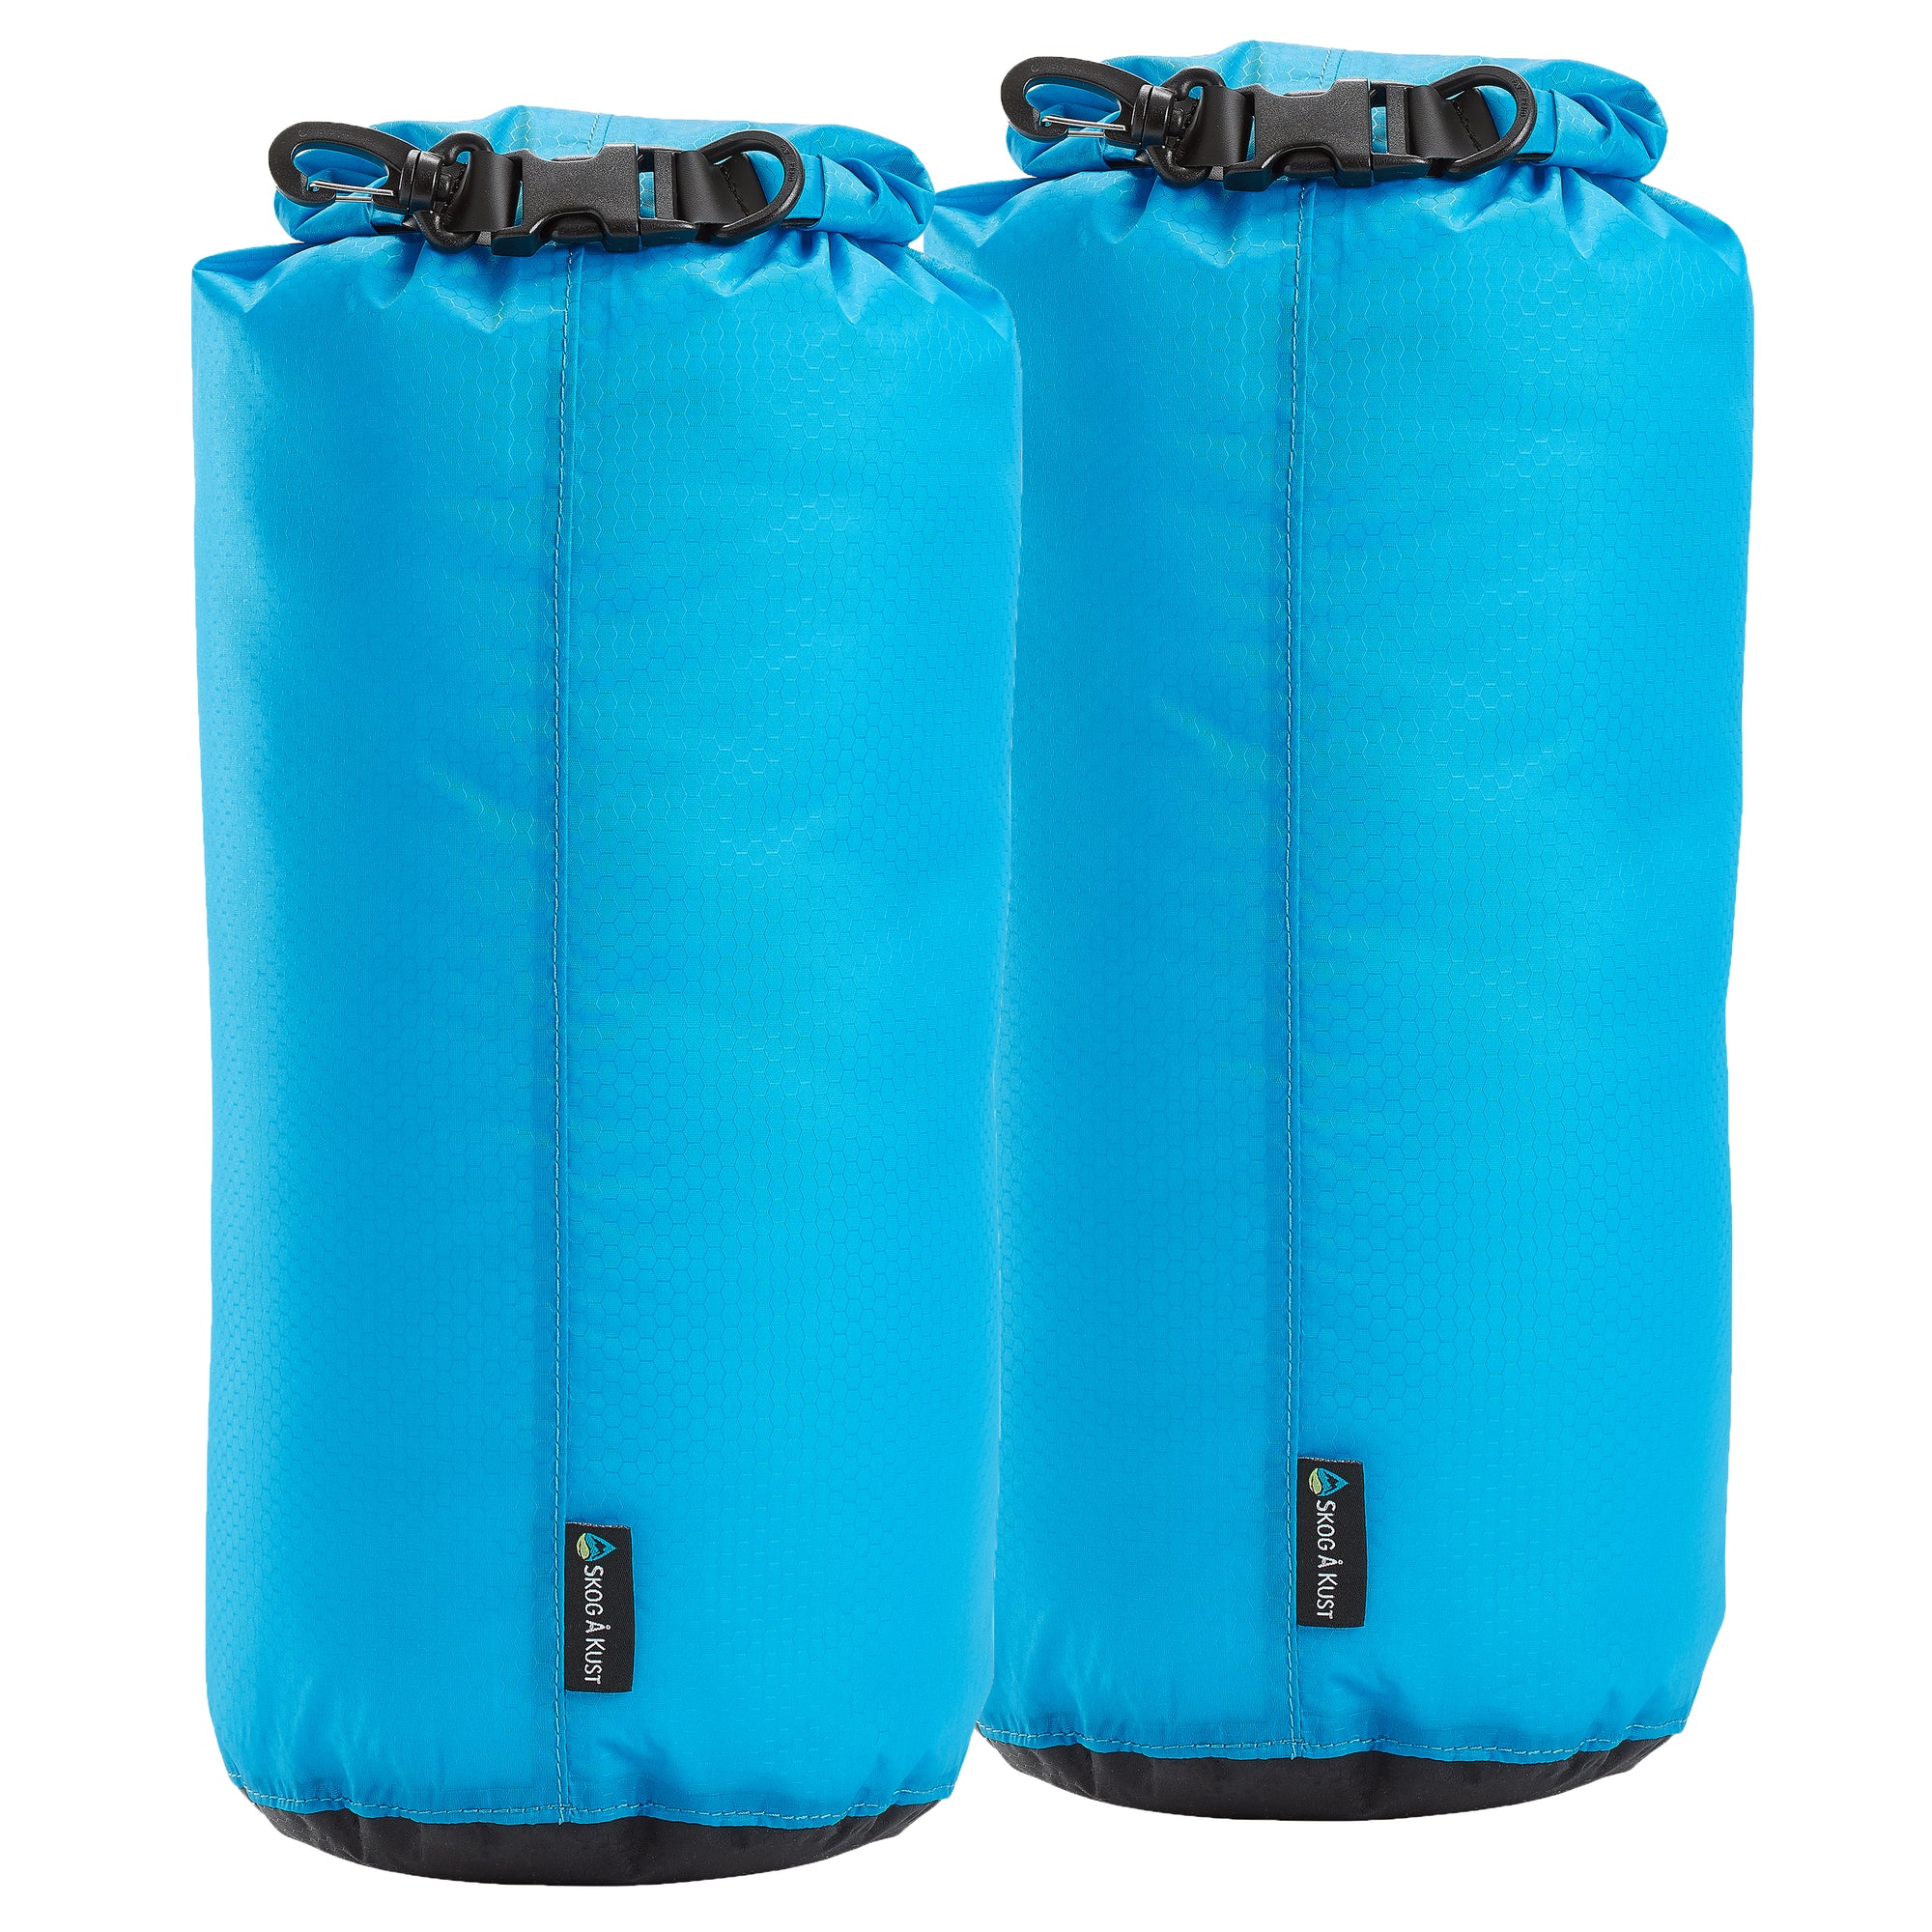 Dry Bags Protects Gear From Water 1 5l To 40l Sizes Dirt Snow Weighs Only Ounces Litesak Waterproof Ultra Light Dry Bag By Skog A Kust 70 Denier Silicone Coated Nylon Heat Taped Seams